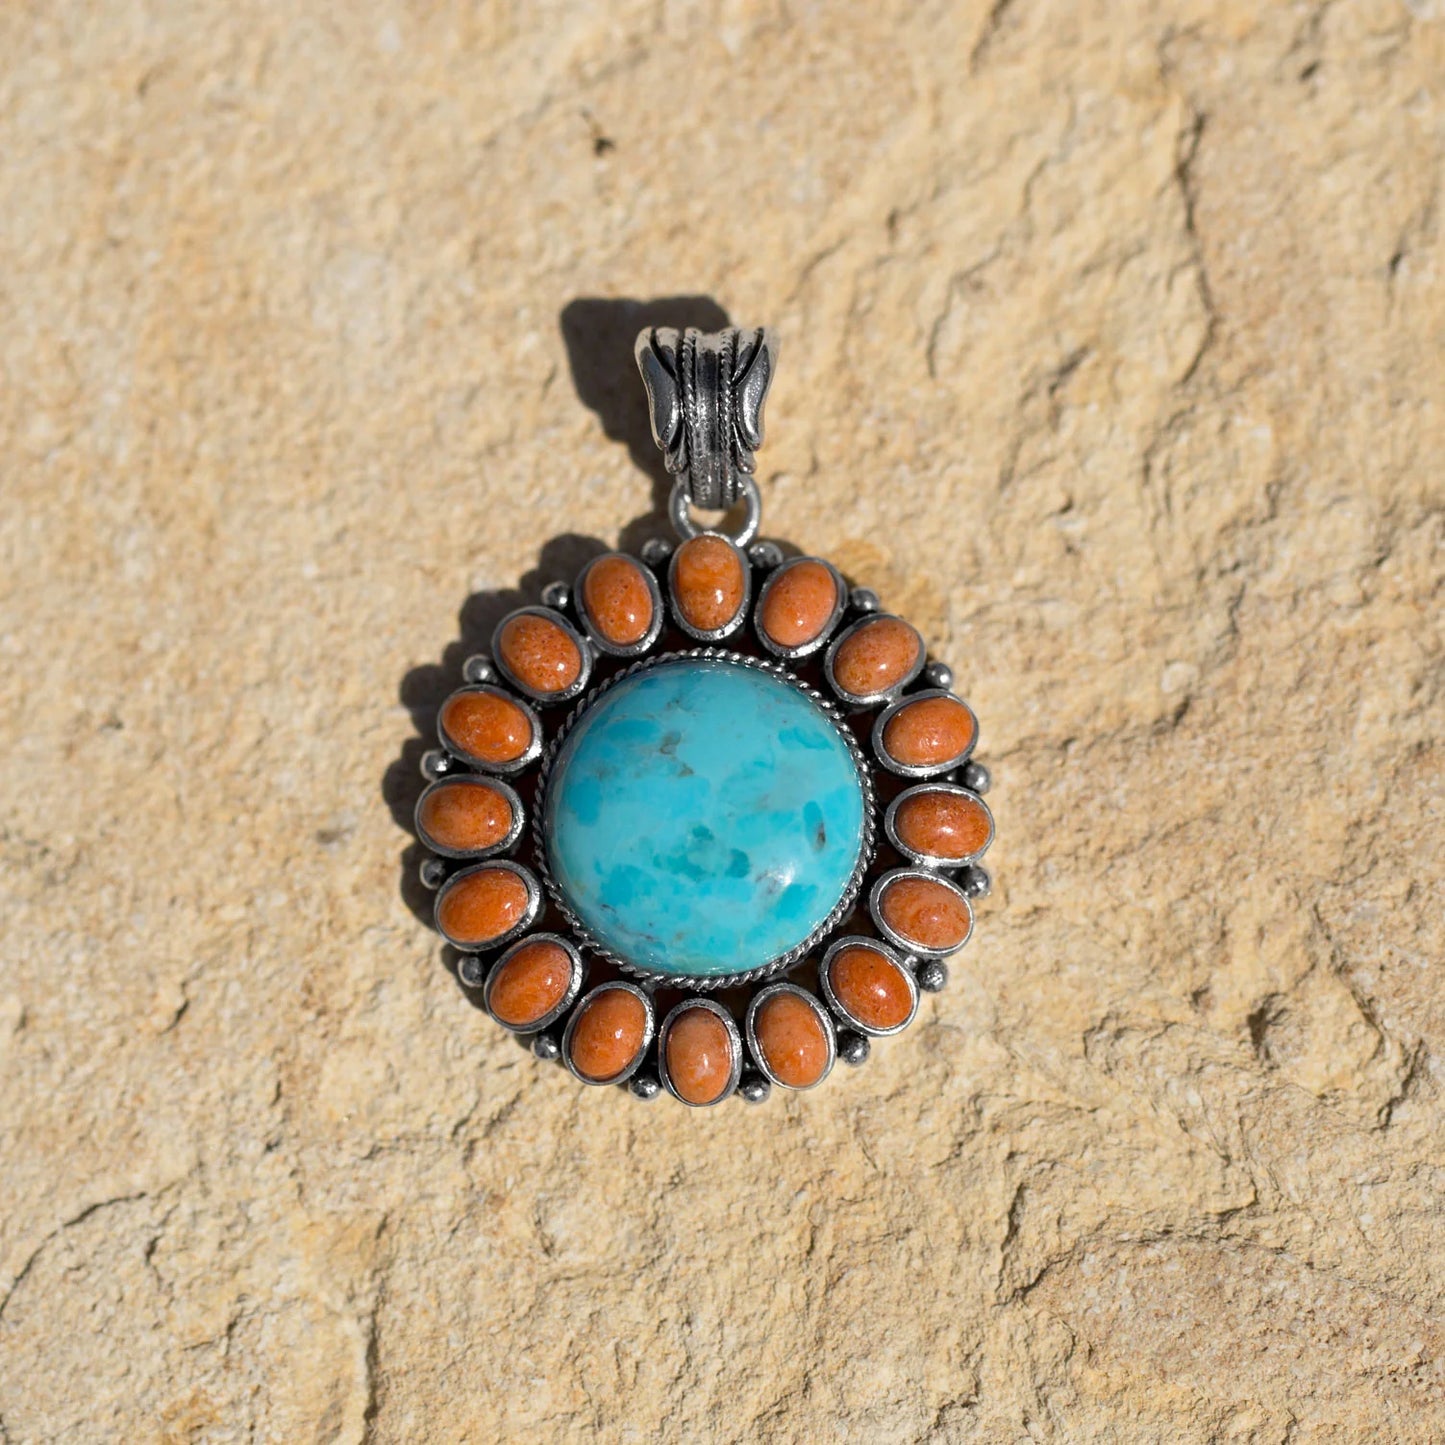 Sunburst Pendant Made of Reconstituted Turquoise and Coral